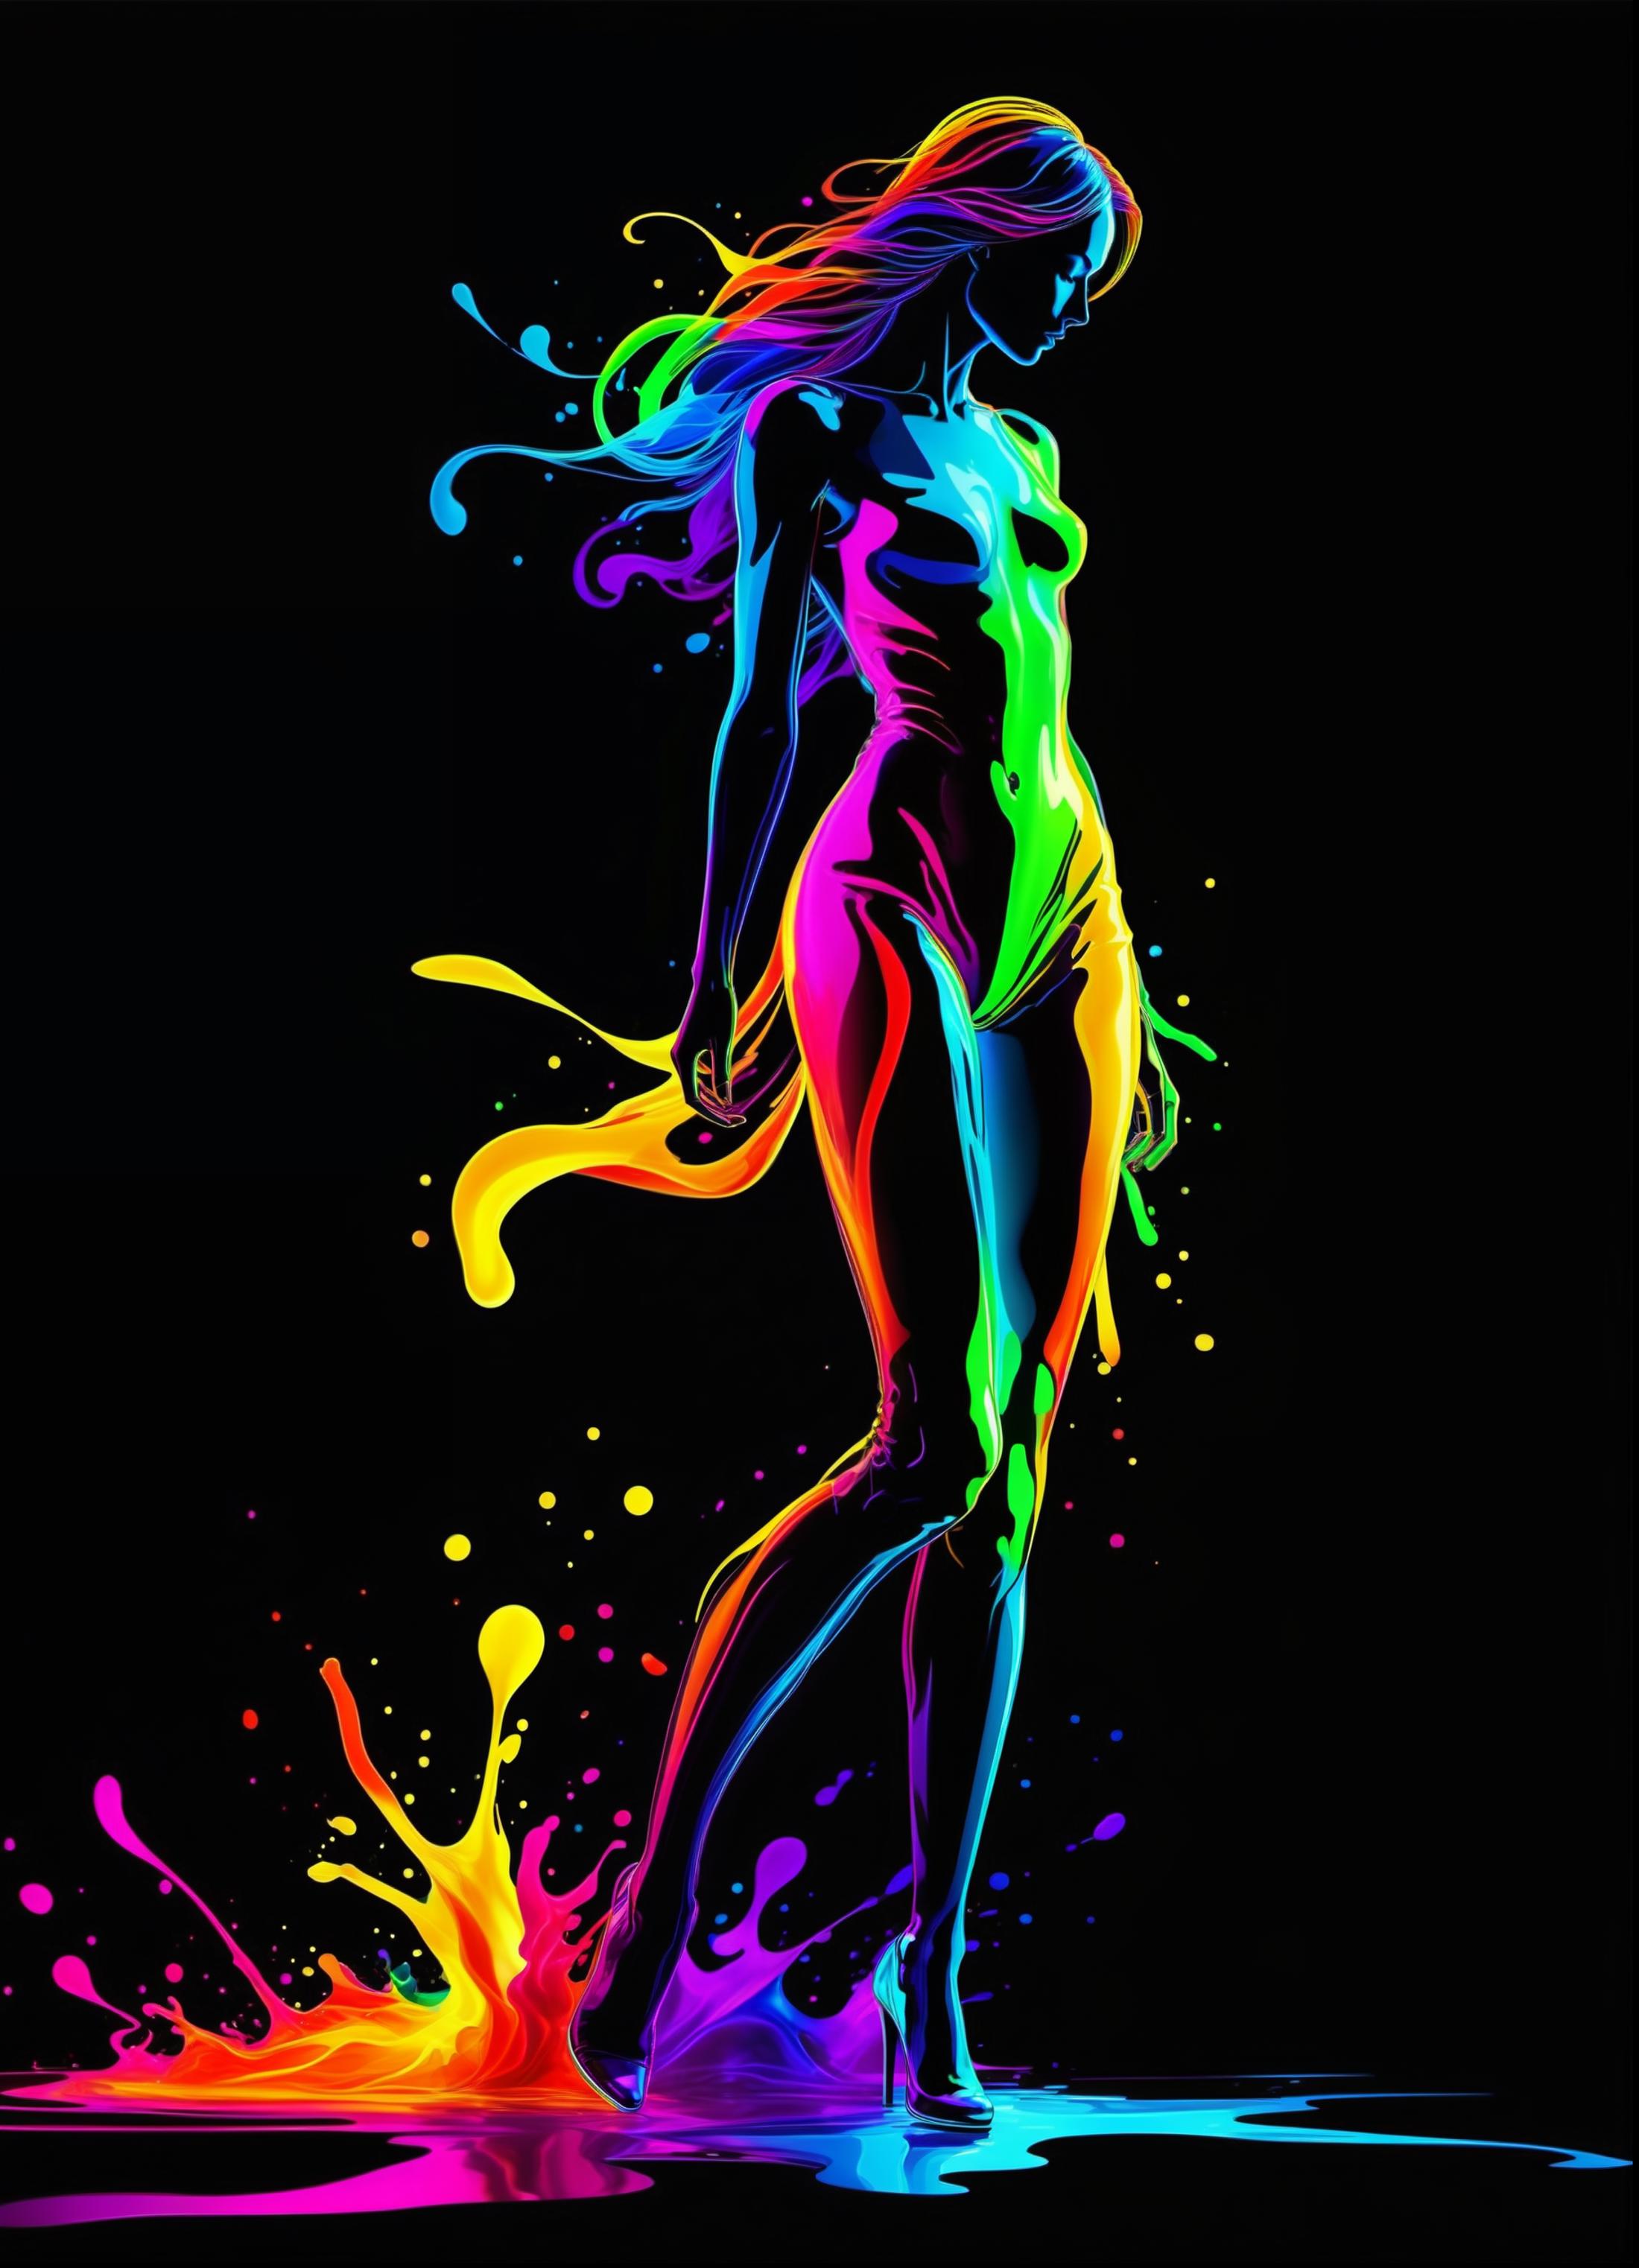 Colorful Woman with Rainbow Legs and Hands Standing in Paint Splatters.